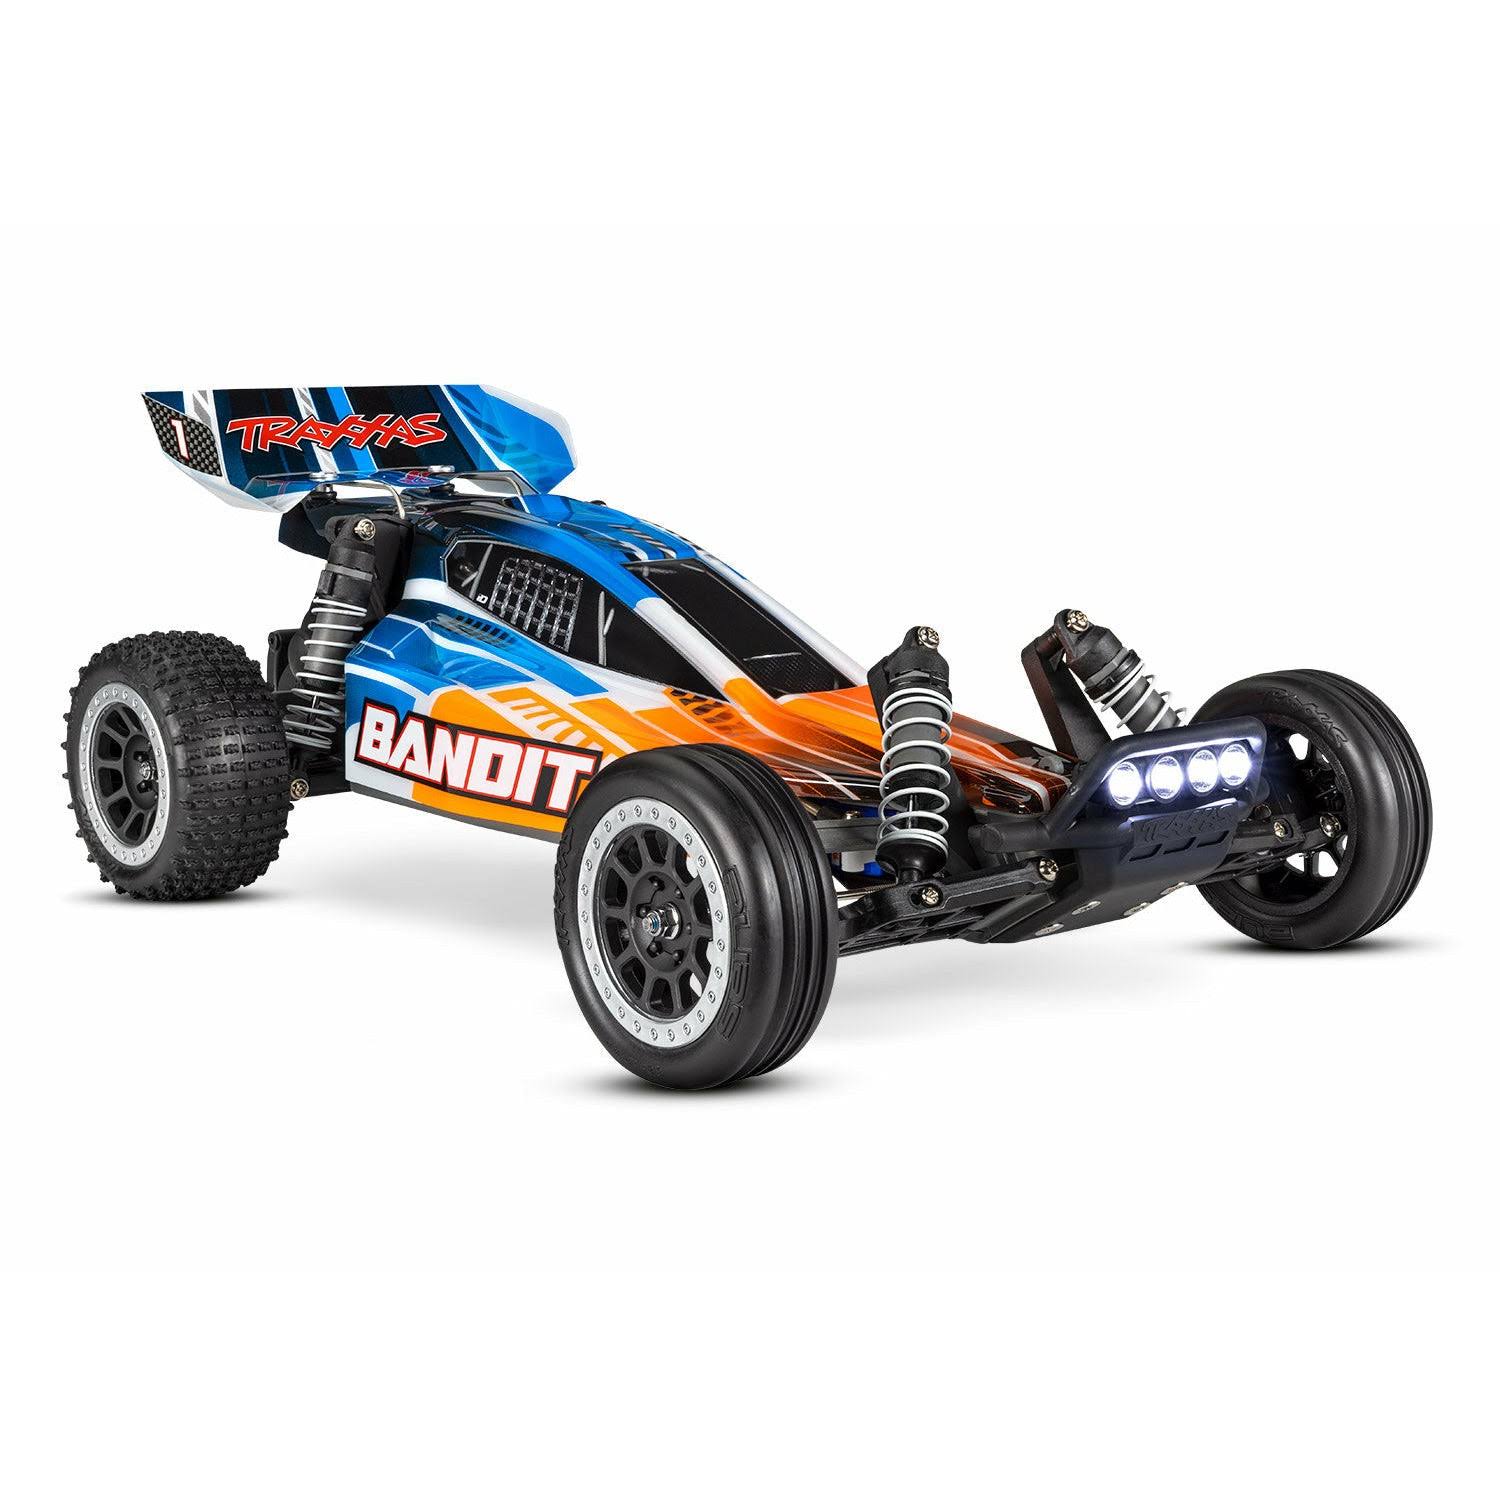 Traxxas Bandit 1/10 XL-5 2WD RC Buggy with LED Lighting Orange 24054-61